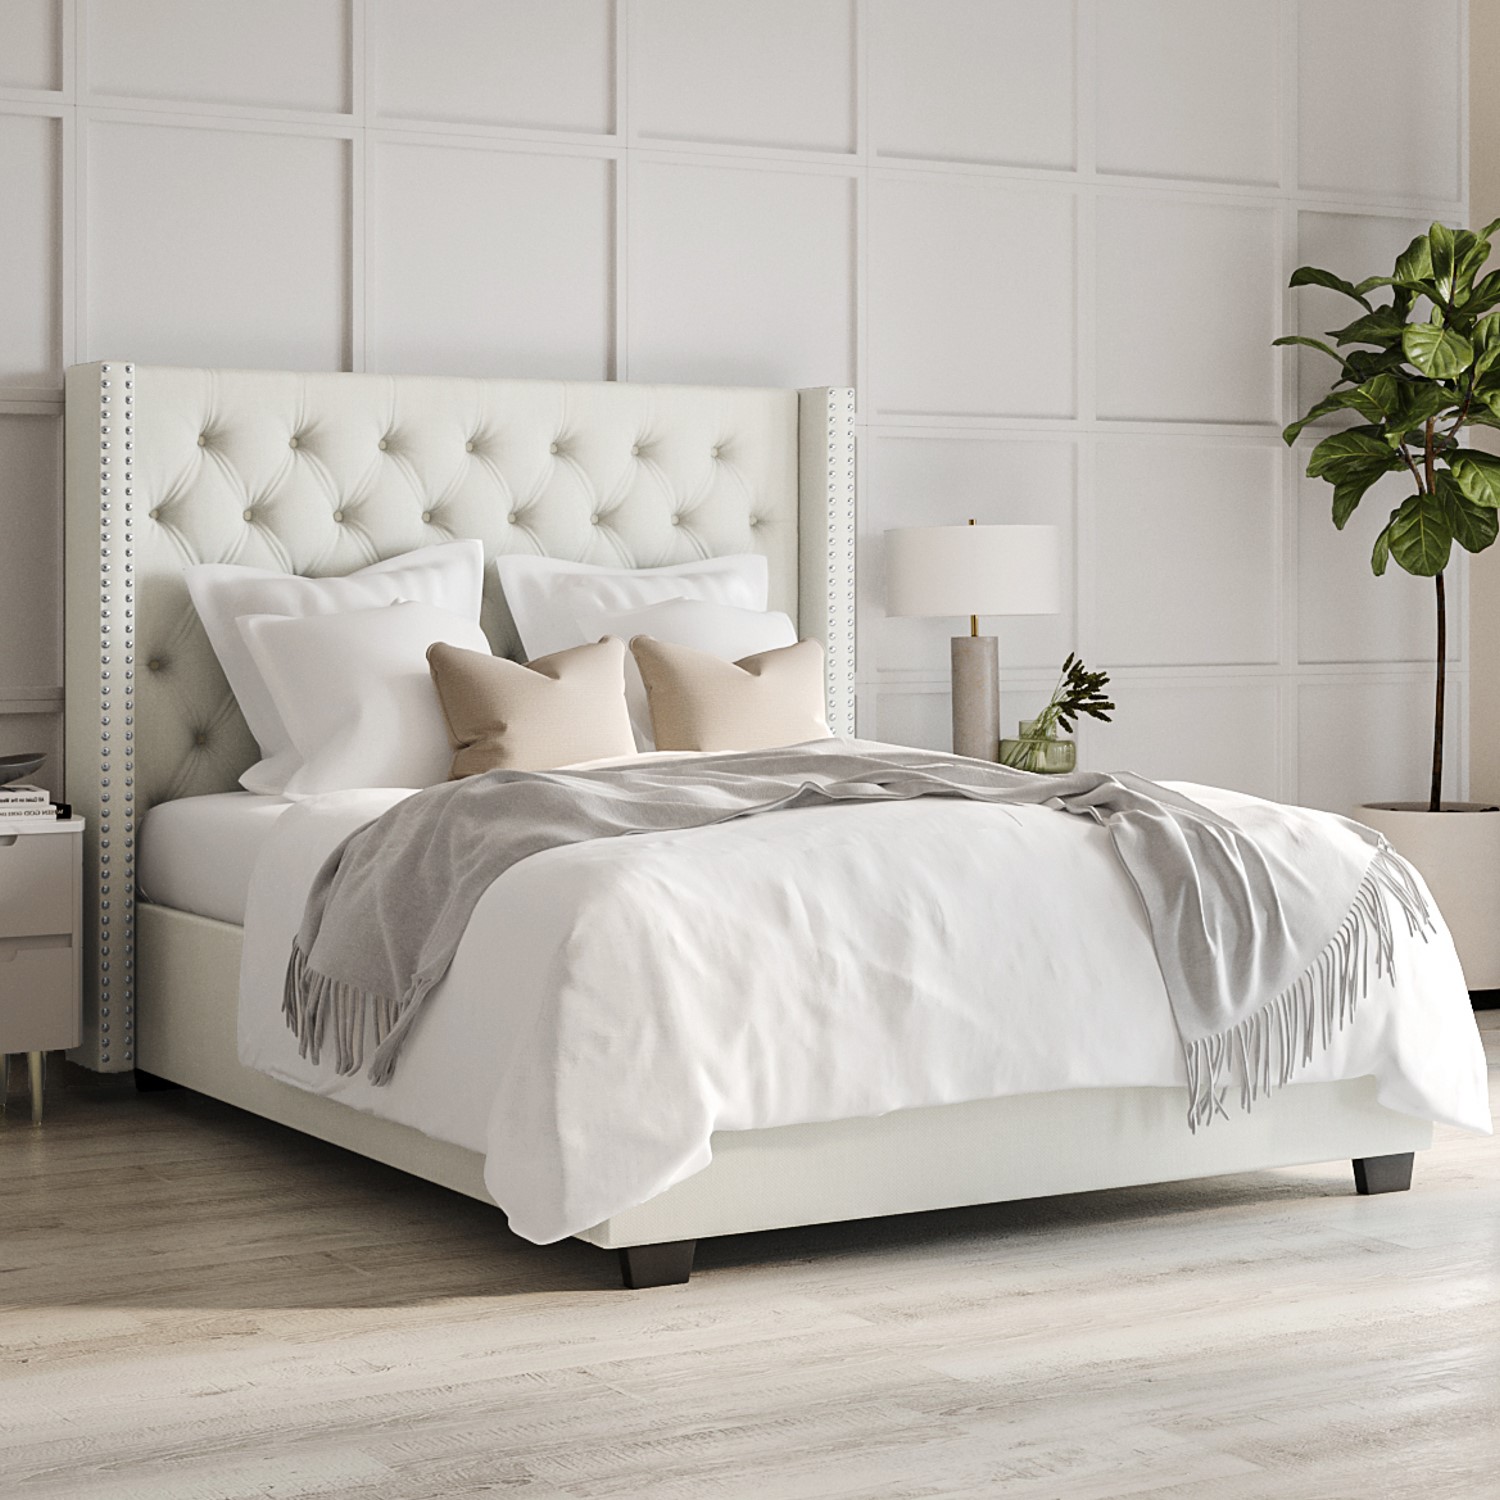 Off White Fabric King Size Ottoman Bed, White Headboard King Bed